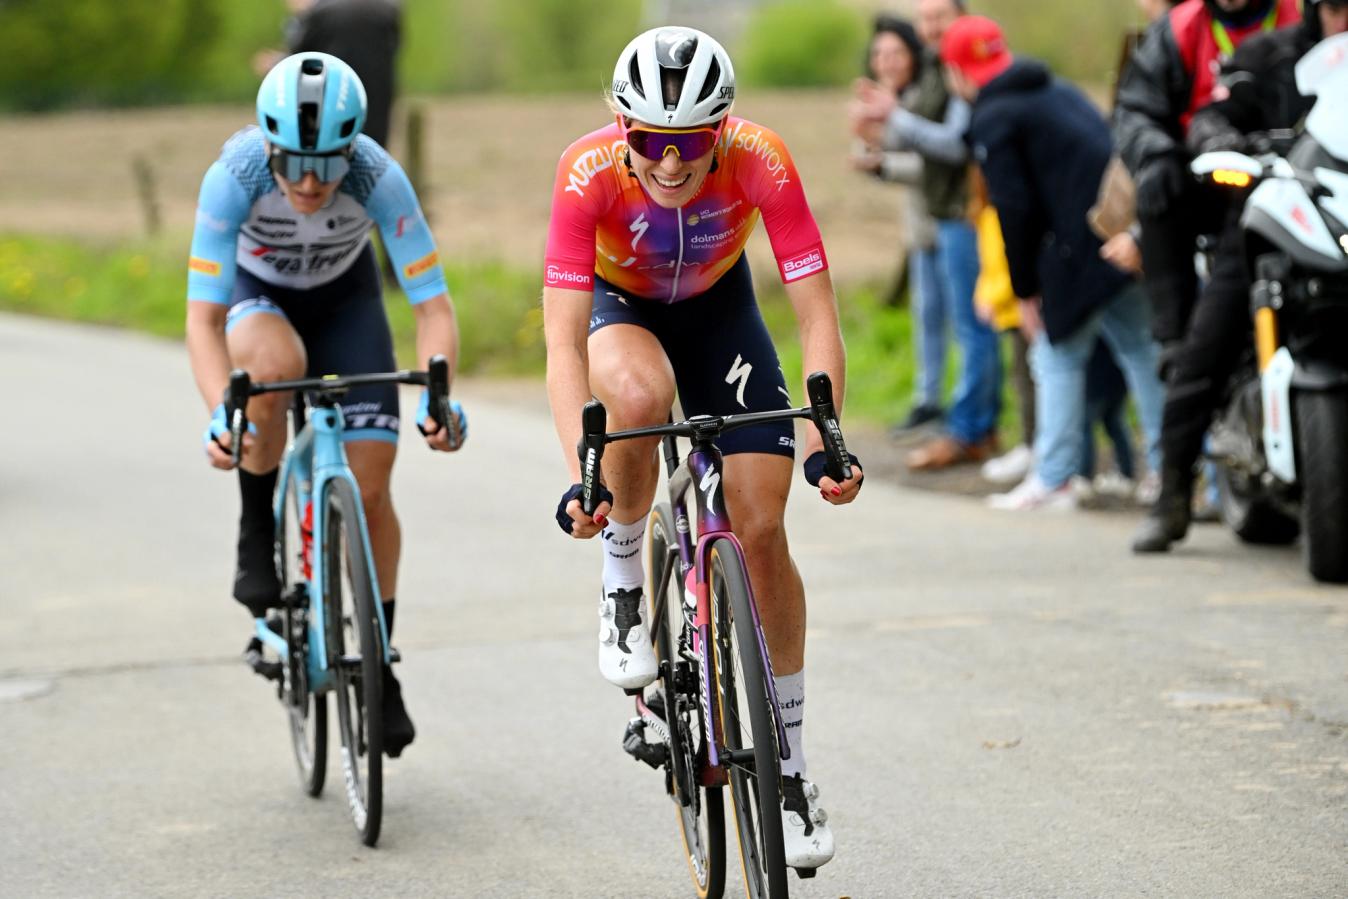 Tour de France Femmes reigning champion Demi Vollering knows a thing or two about performing well at Liège-Bastogne-Liège